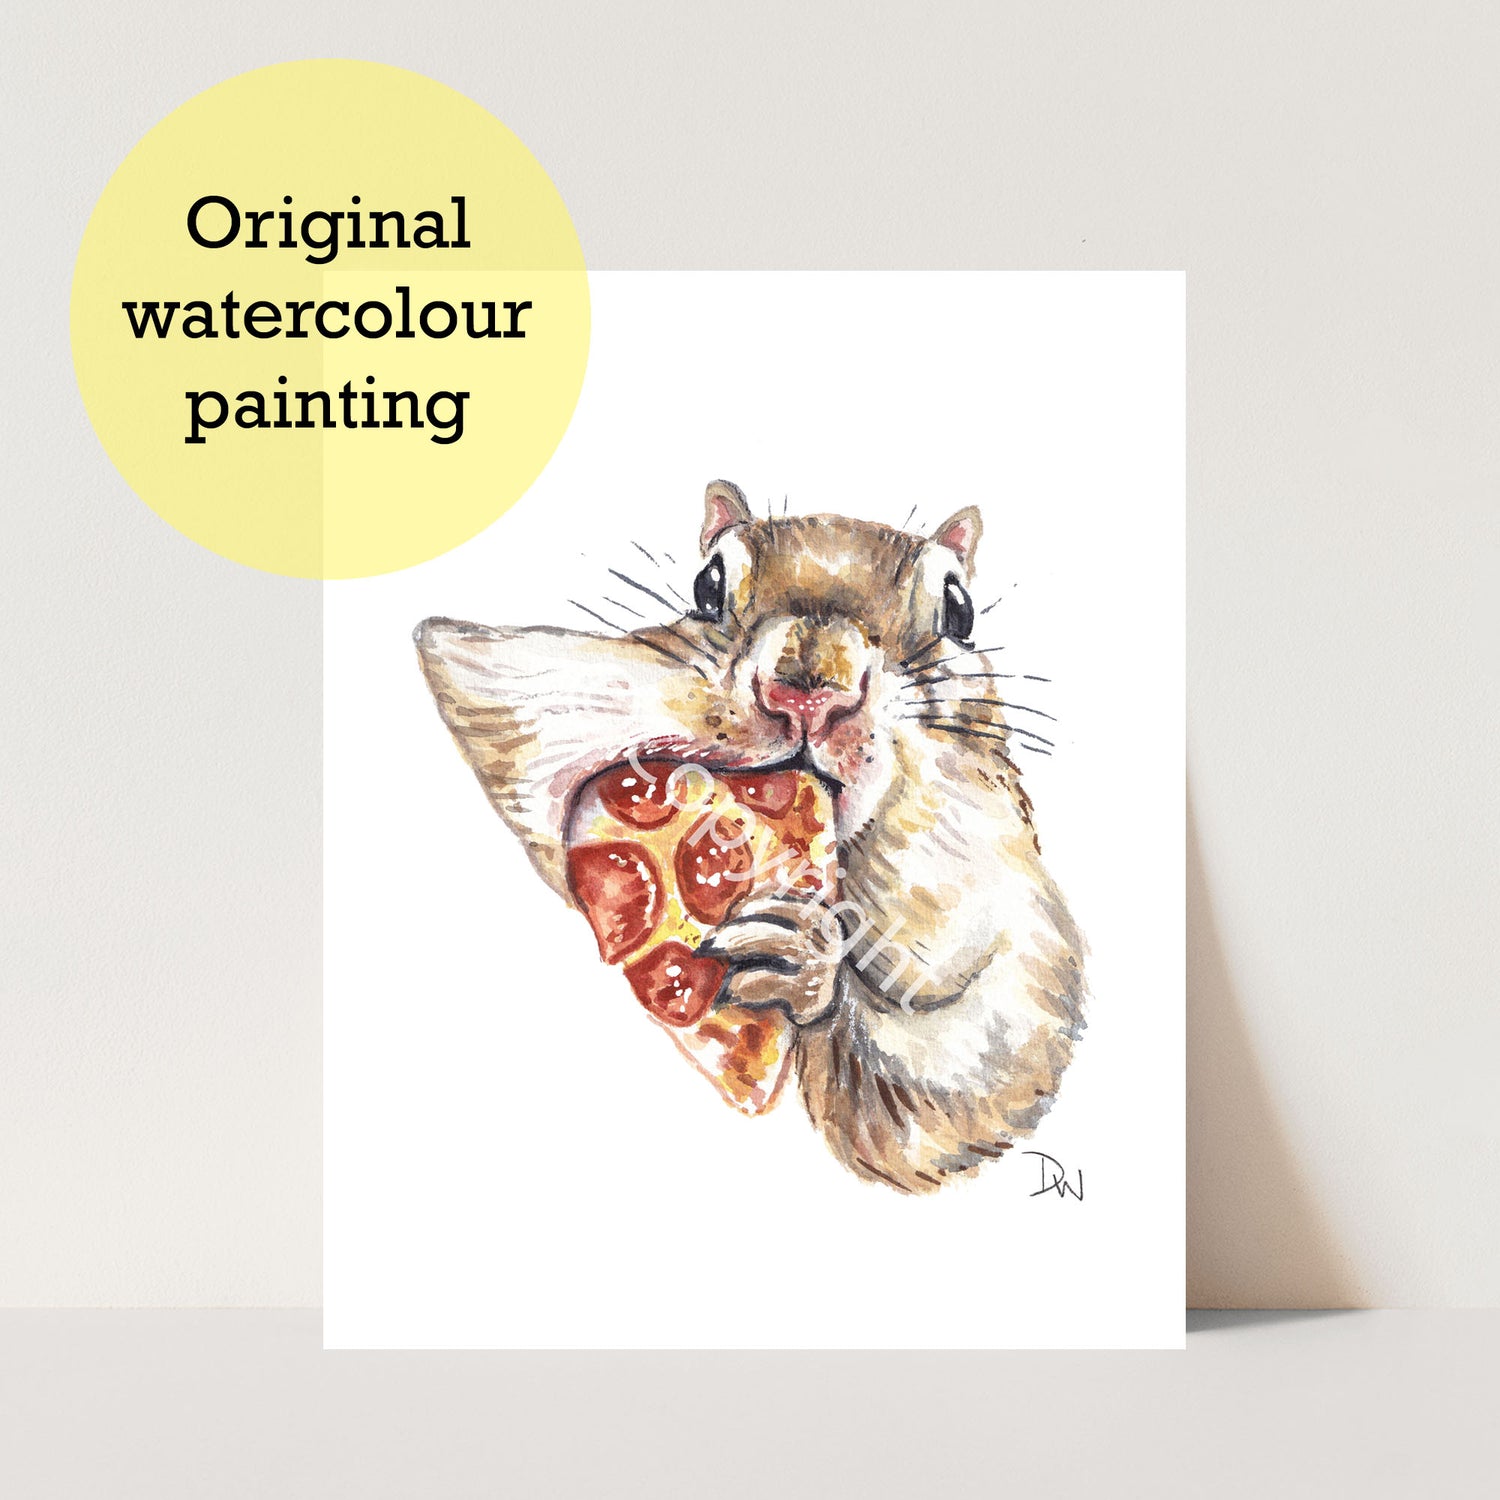 Original watercolour painting of a squirrel stuffing a slice of pizza in it's mouth. Art by Deidre Wicks